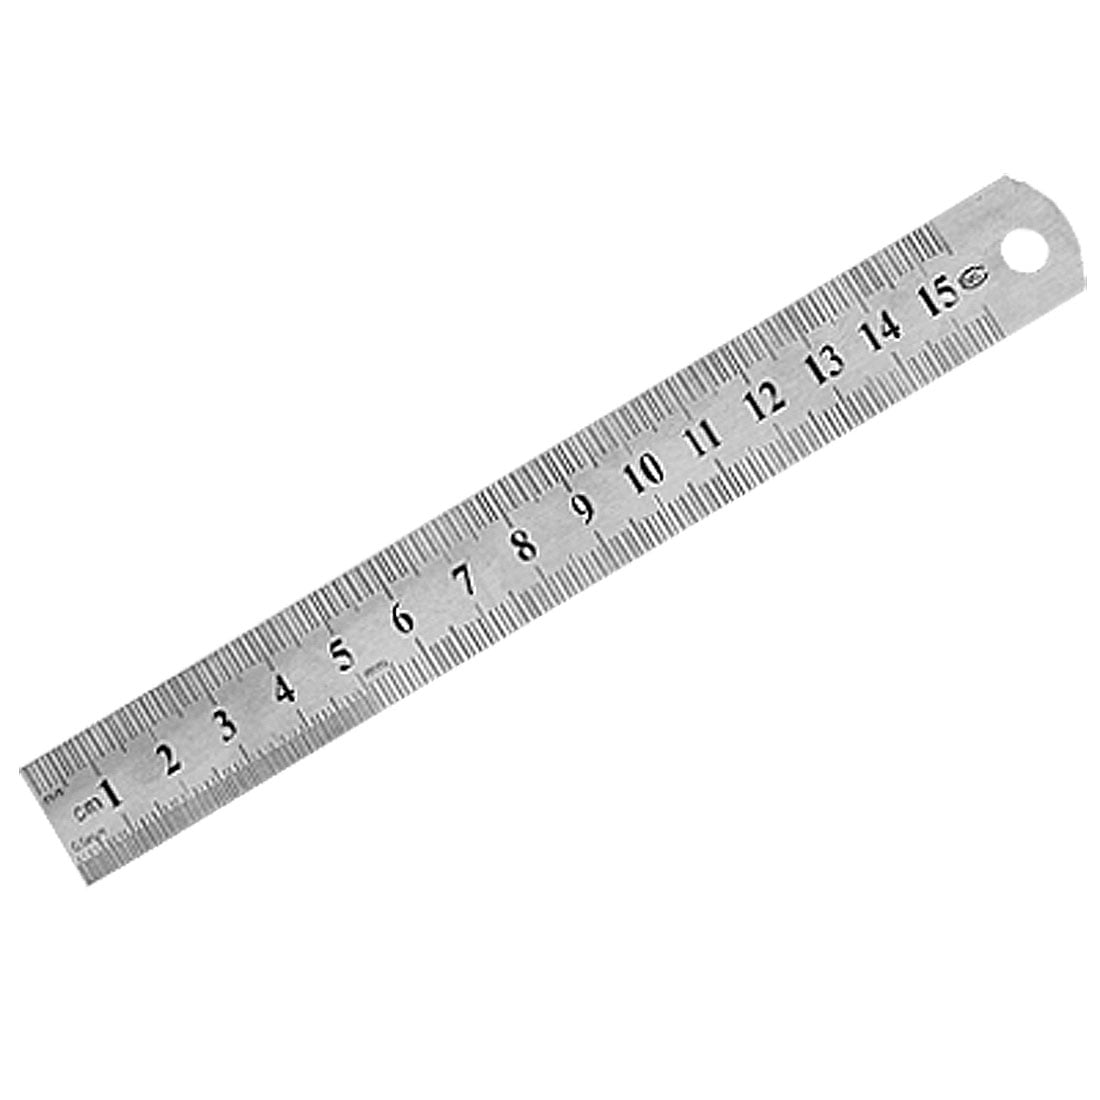 6 Inch / 15cm Rulers Shatter Resistant Pack of 5 Pastel -  Norway